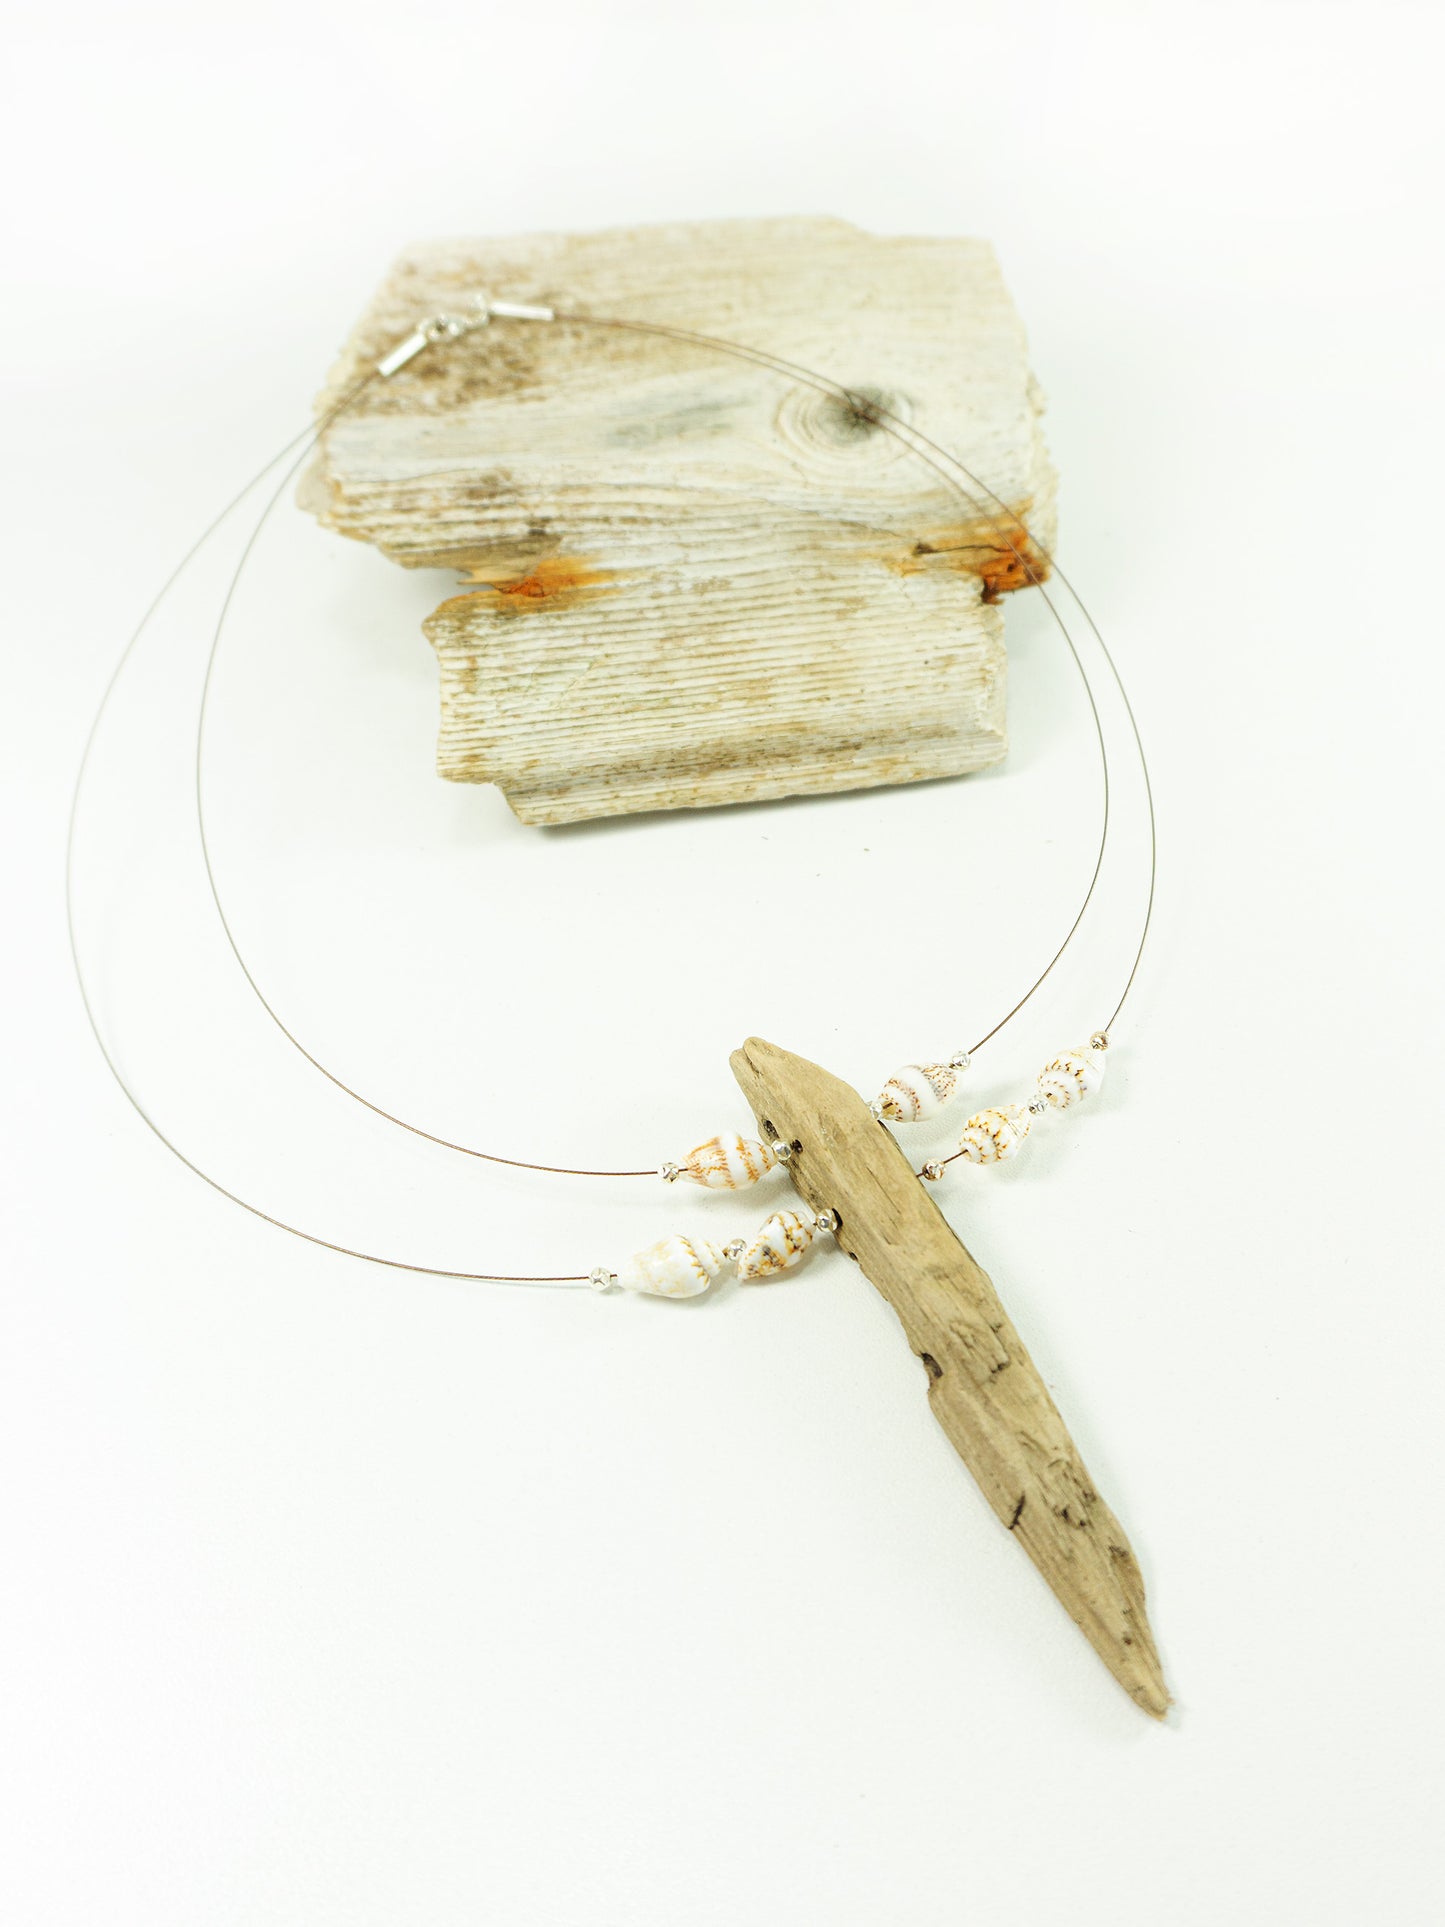 Unique DRIFTWOOD NECKLACE 'Föhr' with seashells, silver and nylon wire